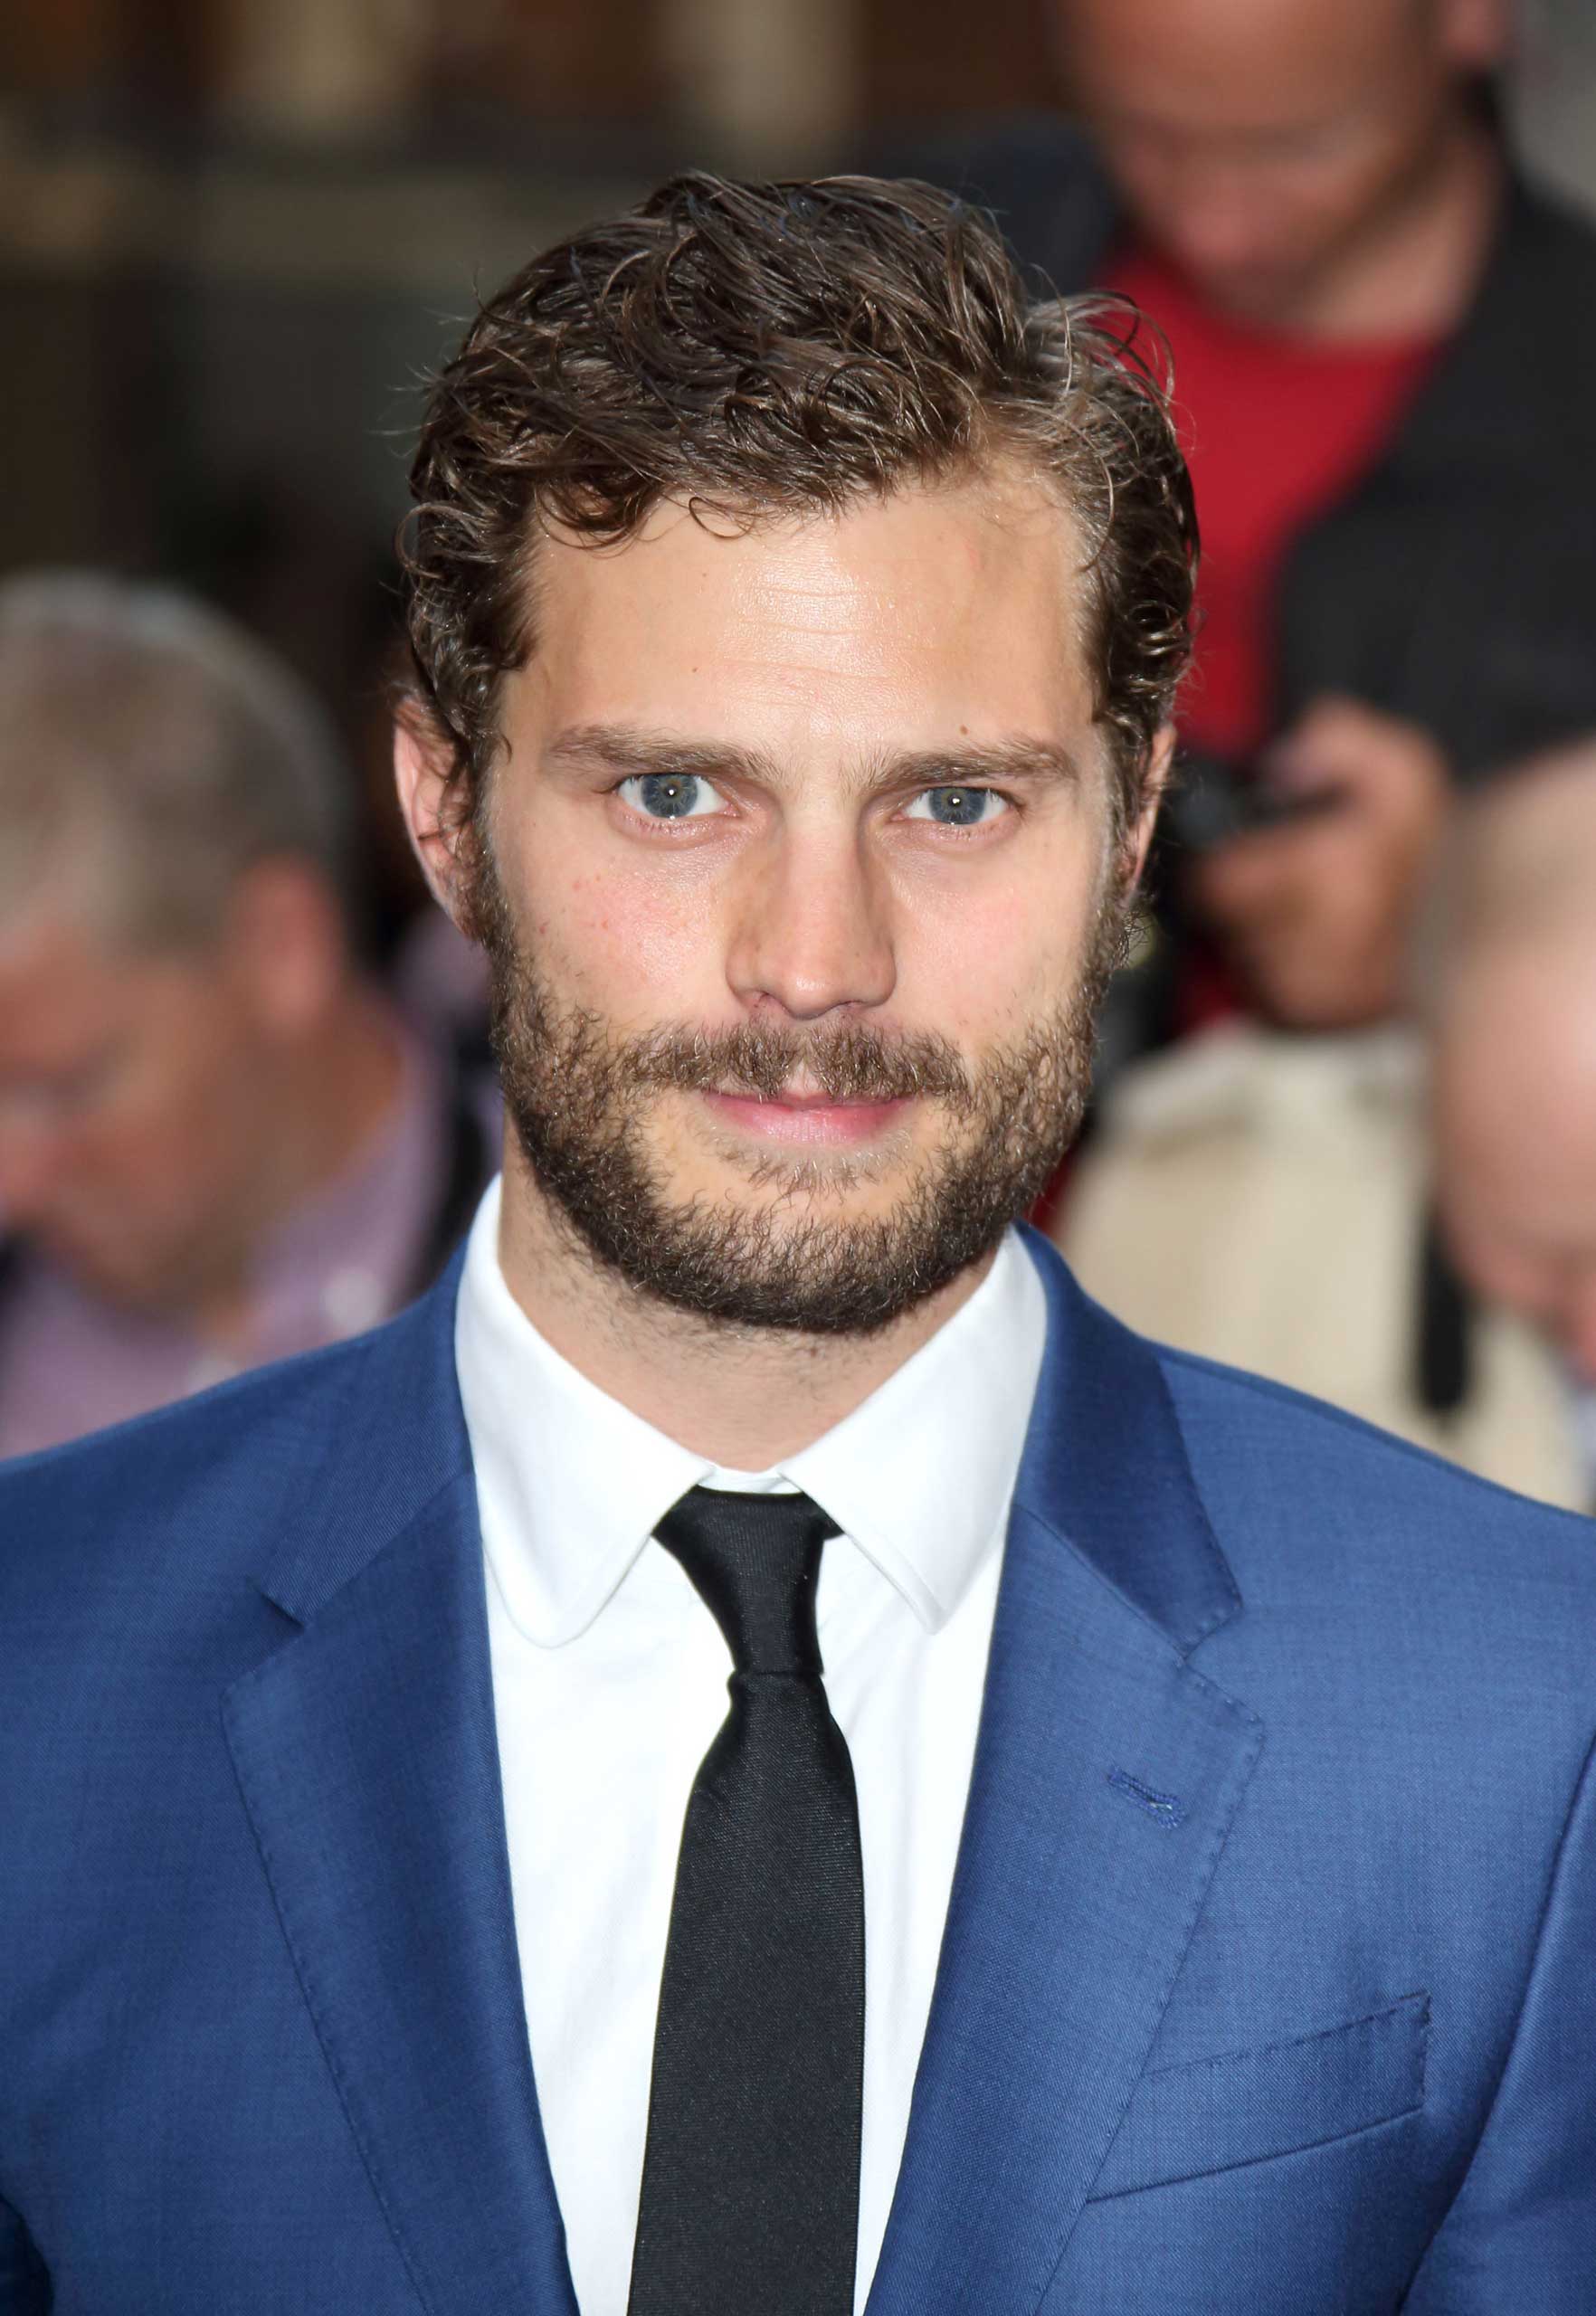 Jamie Dornan attends the GQ Men of the Year awards at The Royal Opera House on Sept. 2, 2014 in London.